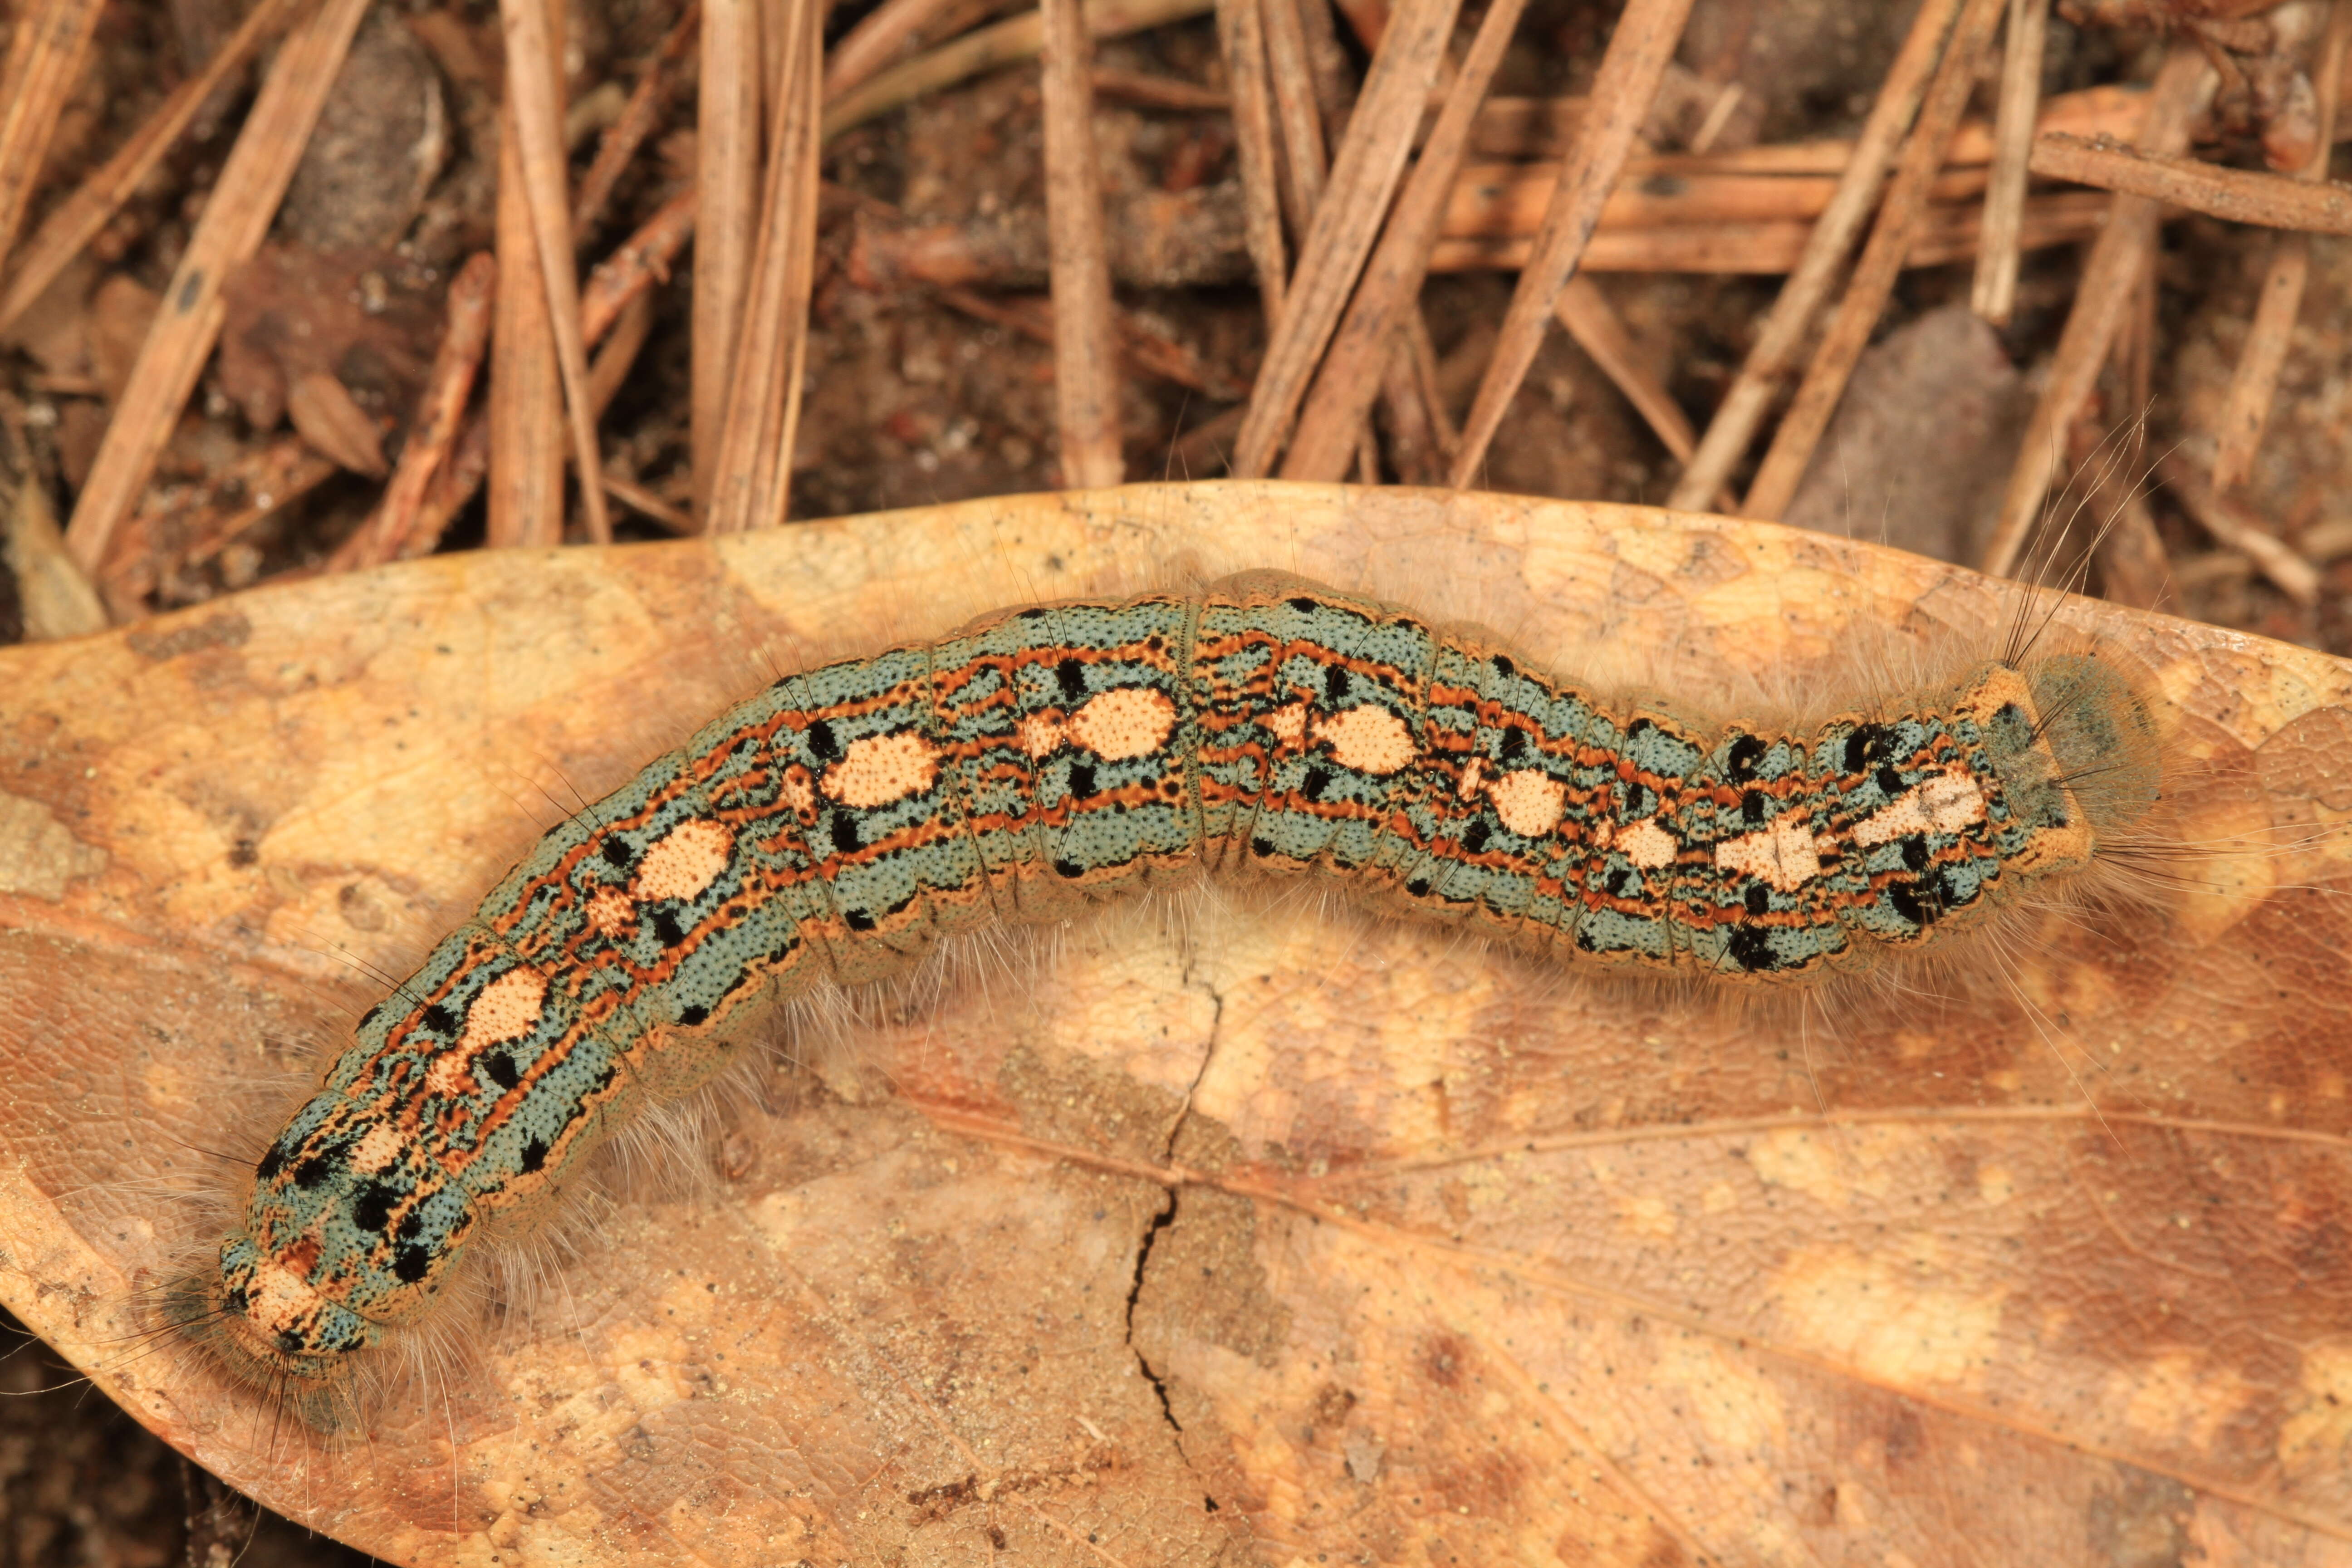 Forest tent caterpillar with penguins on its back